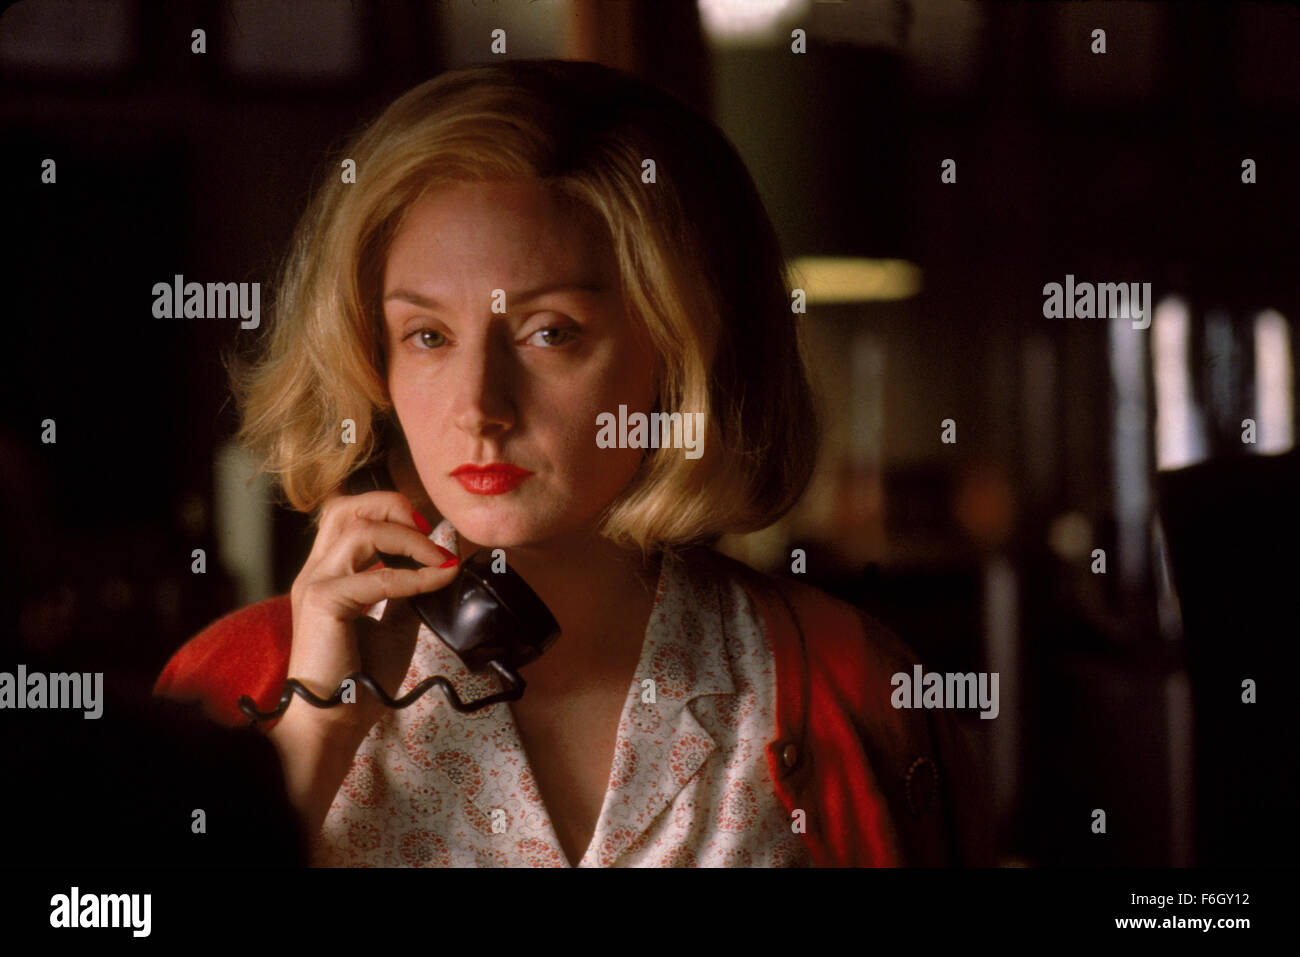 RELEASE DATE: 28 September 2001. MOVIE TITLE: Hearts in Atlantis. STUDIO: Castle Rock Entertainment. PLOT: A widowed mother and her son change when a mysterious stranger enter their lives. PICTURED: HOPE DAVIS as Liz Garfield. Stock Photo